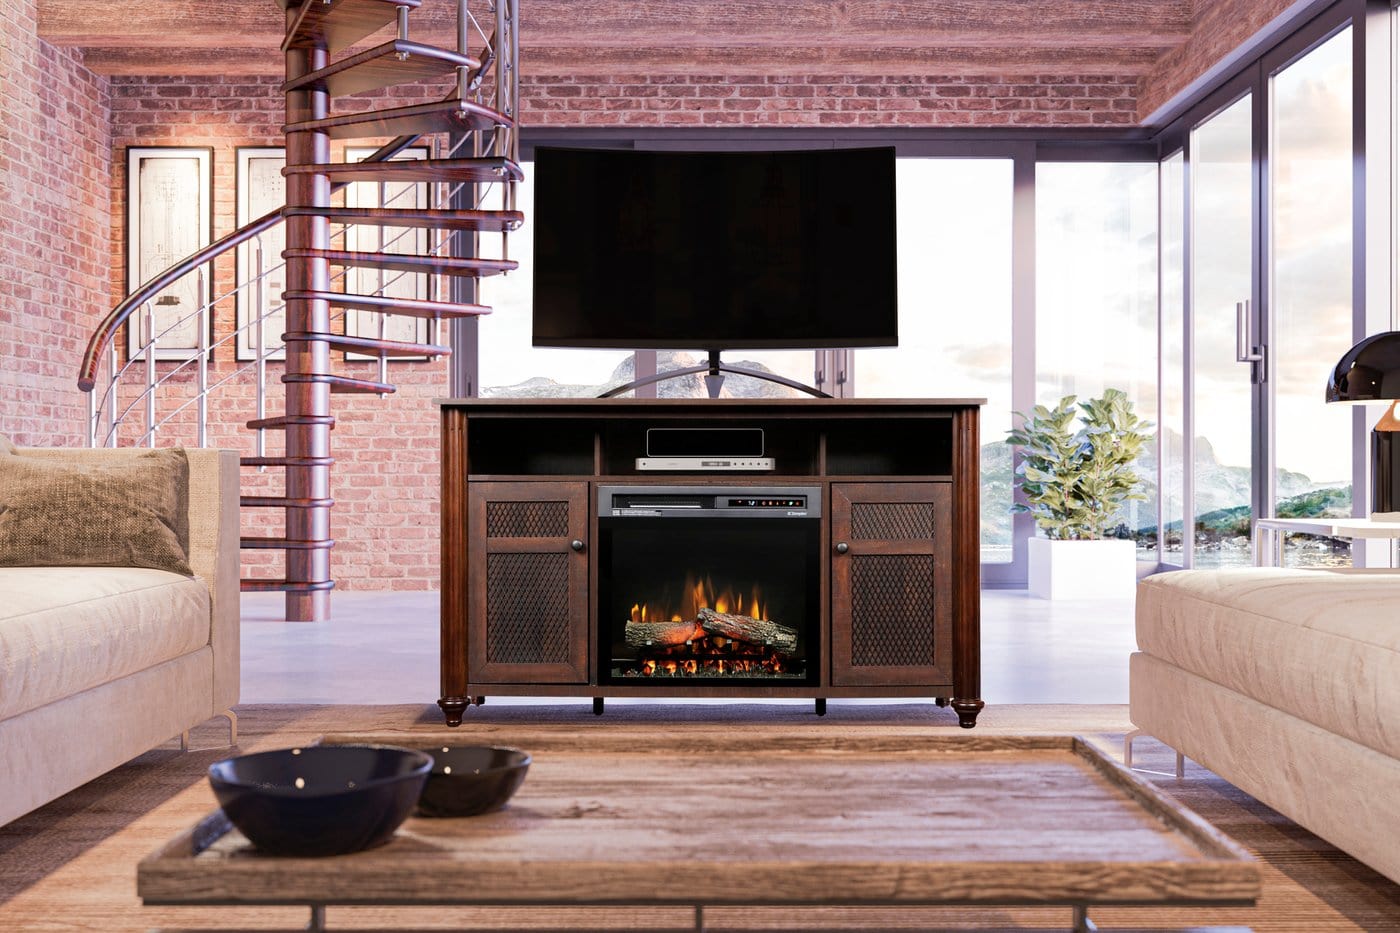 Dimplex 56-Inch Xavier Television Stand Electric Fireplace with XHD26L Electric Firebox